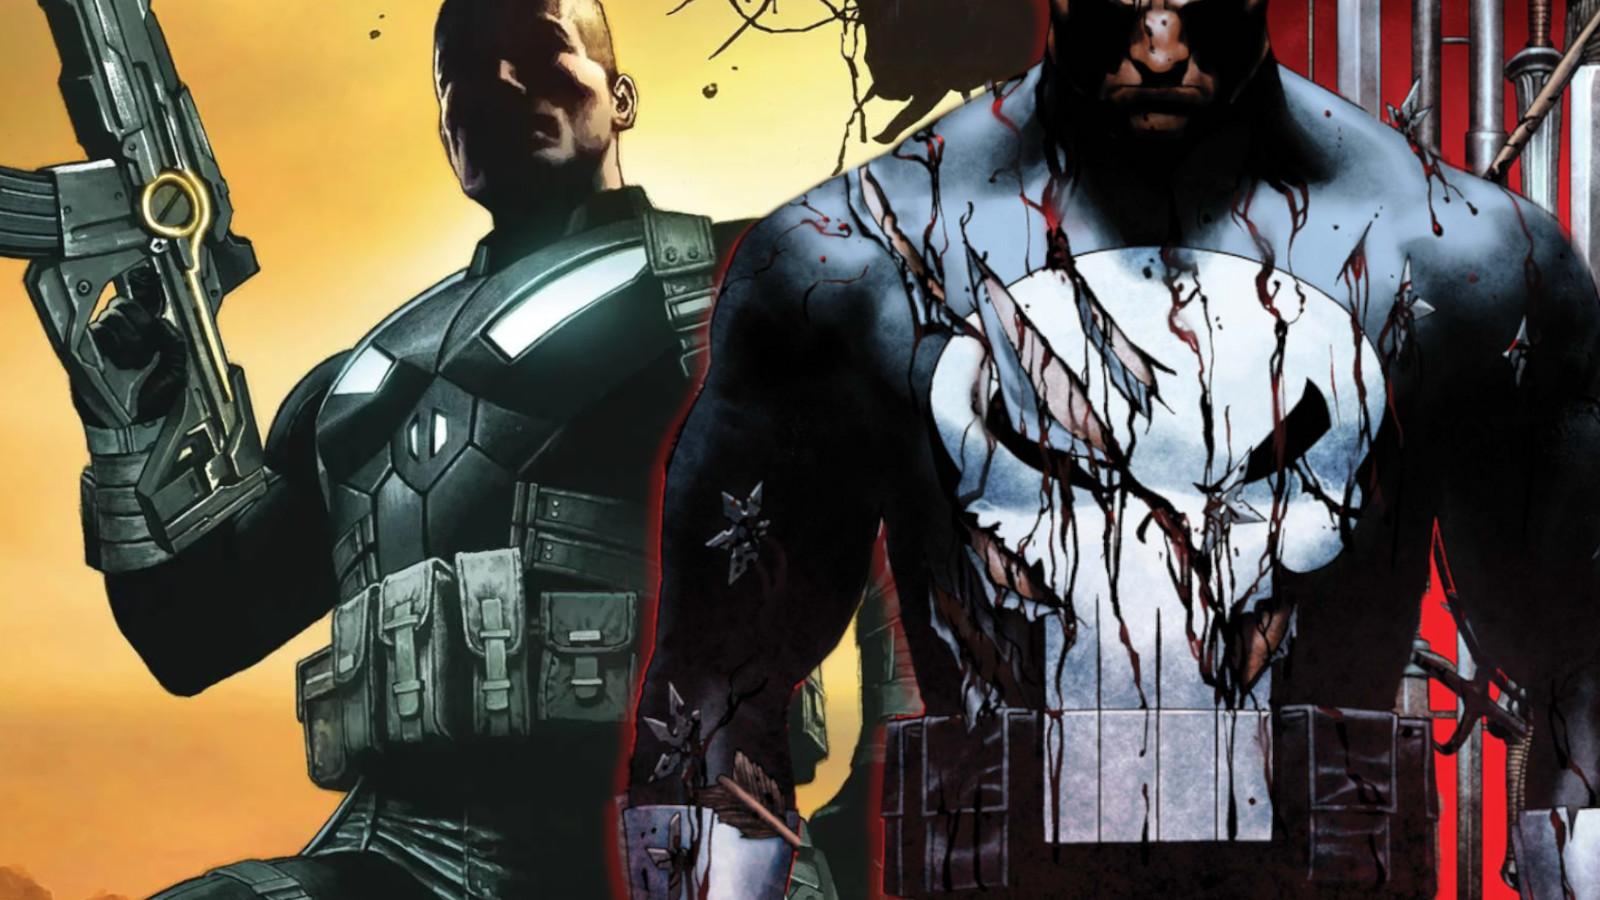 Who is Marvel's new Punisher and where is Frank Castle? - Dexerto